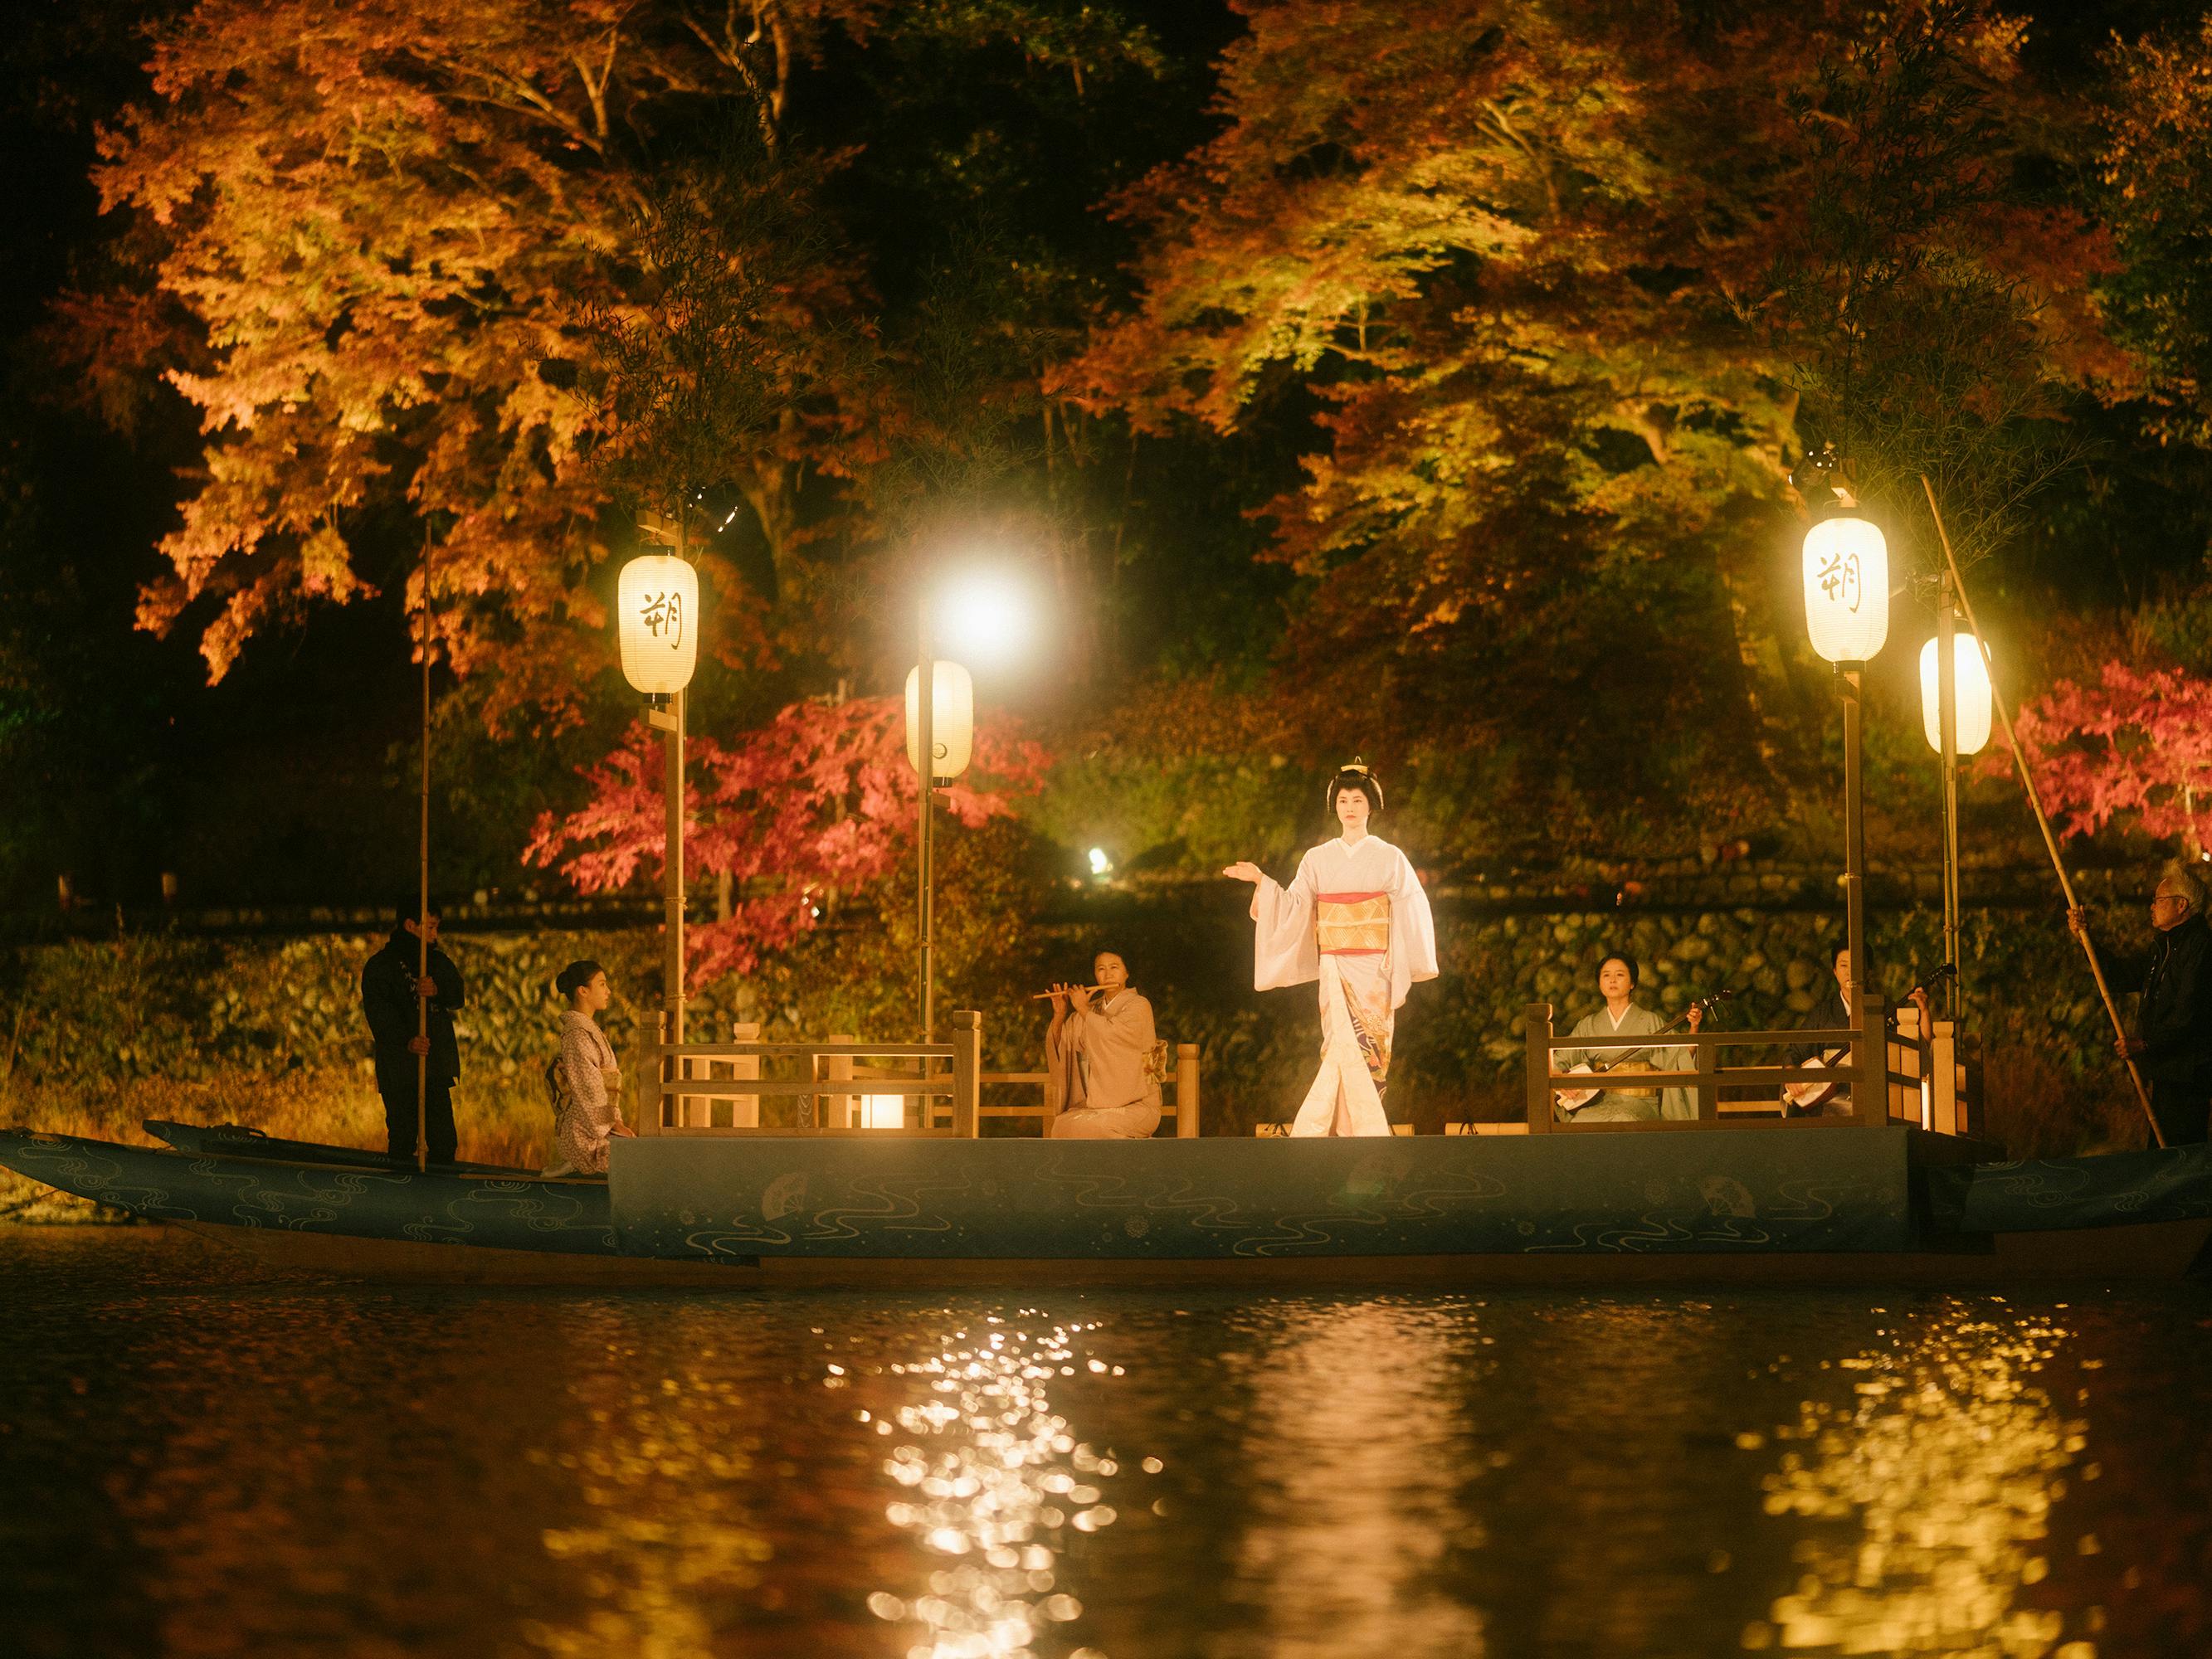 A boat carrying some young women through a candle-lit river. Above the boat are some trees with red, orange, green, and yellow leaves.